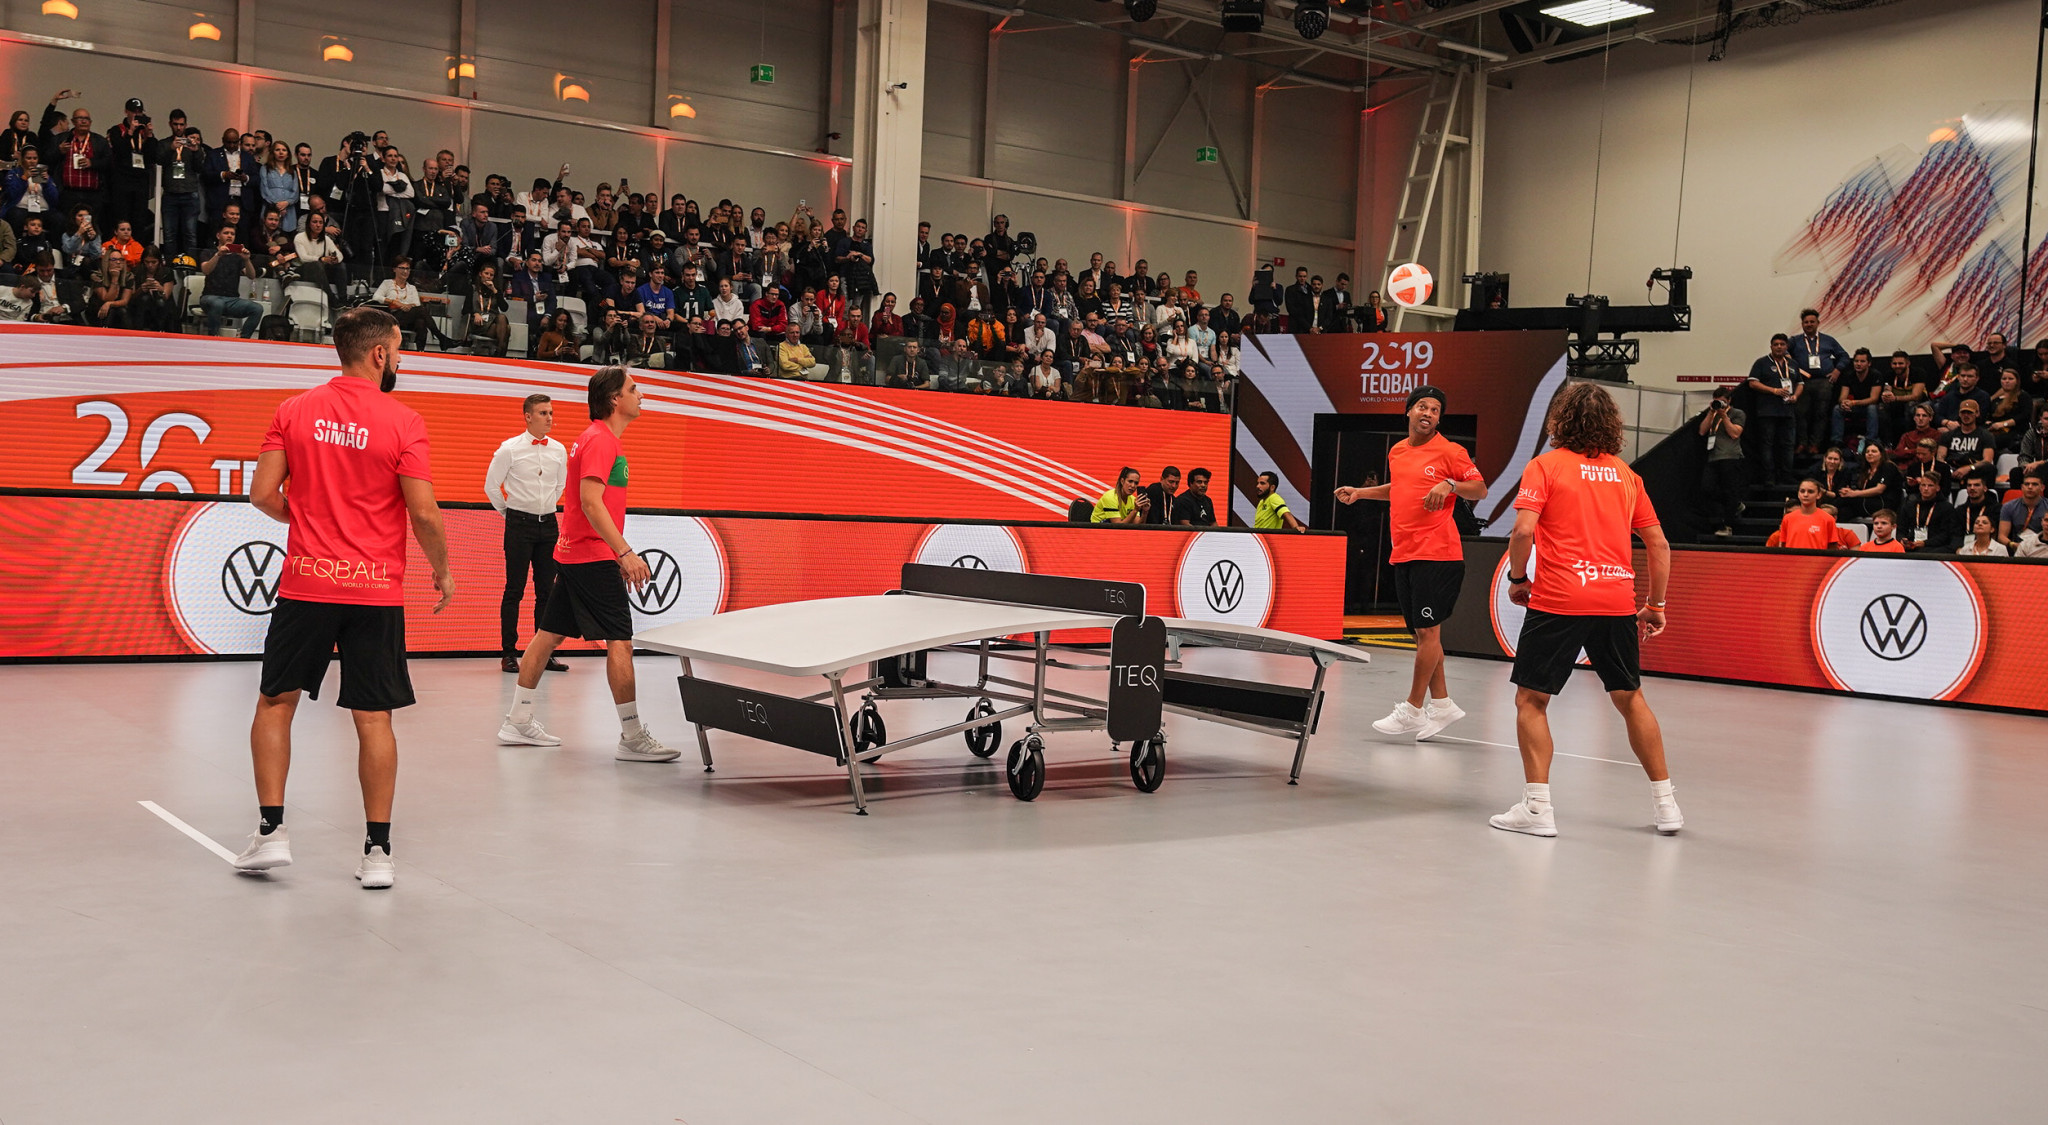 The new Teq Lite table was demonstrated during the Teqball World Championships ©FITEQ